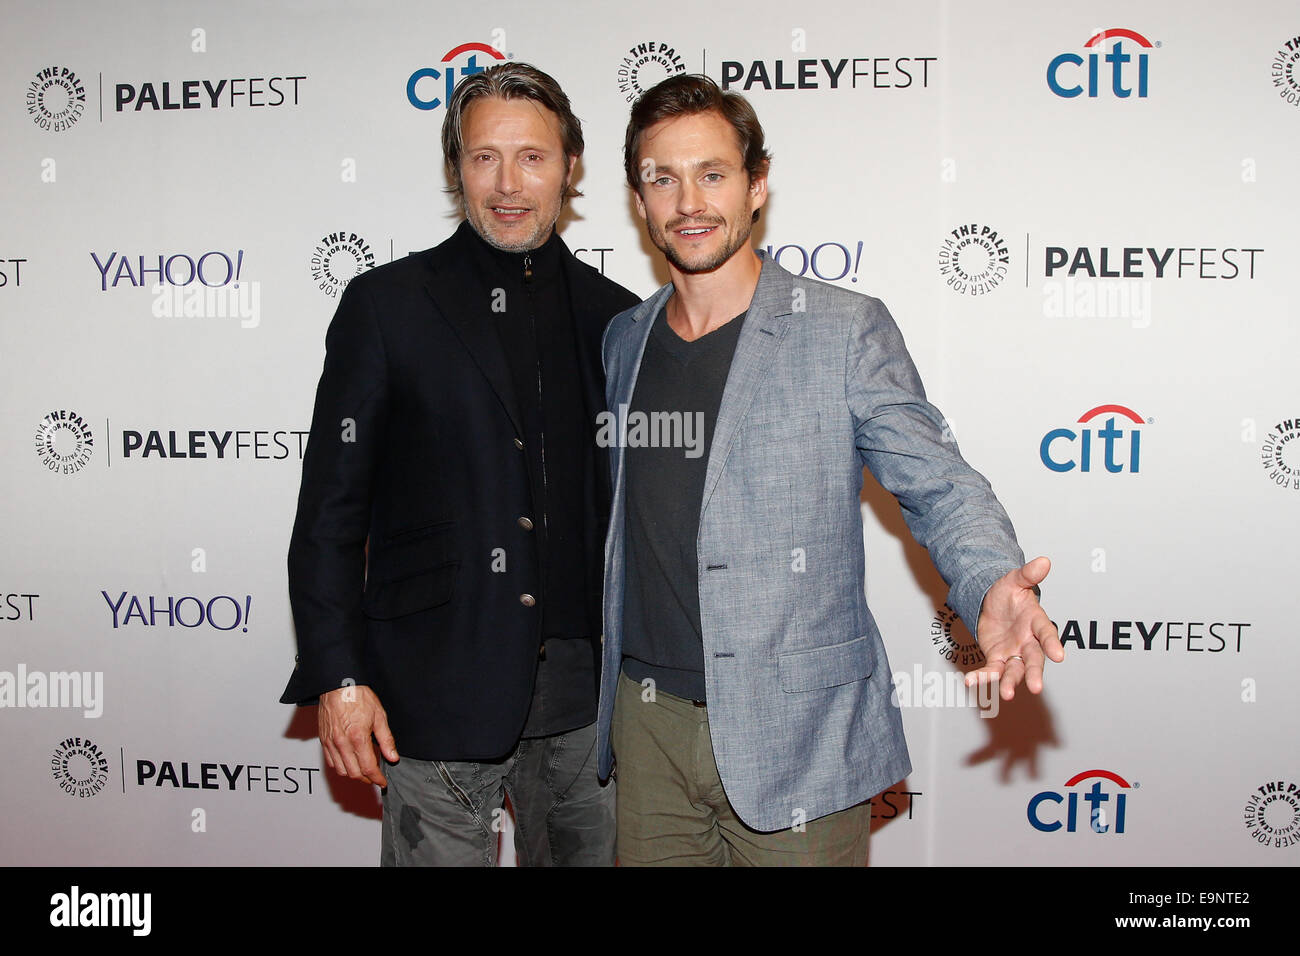 Mads Mikkelsen (L) and Hugh Dancy attend PaleyFest NY 2014 for "Hannibal" at The Paley Center for Media on October 18, 2014. Stock Photo